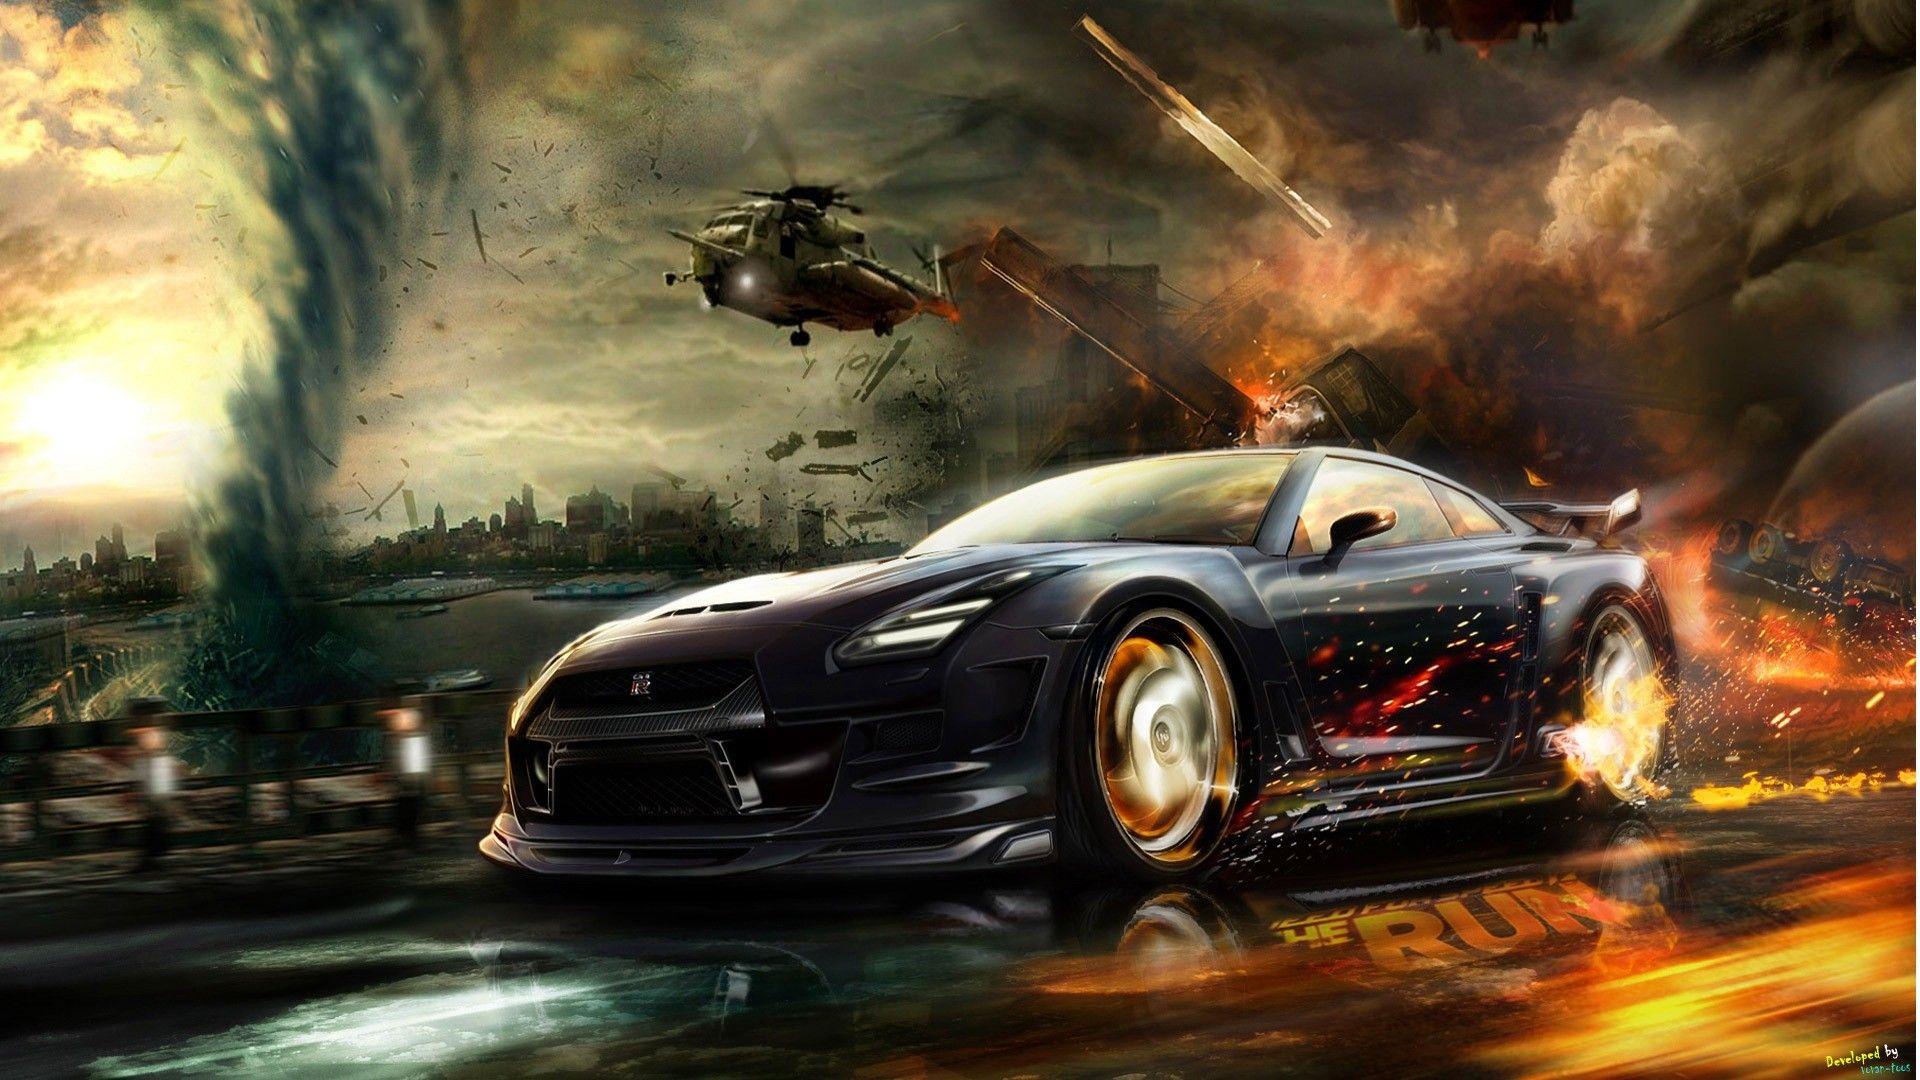 Need for Speed Most Wanted Cars Wallpaper background picture